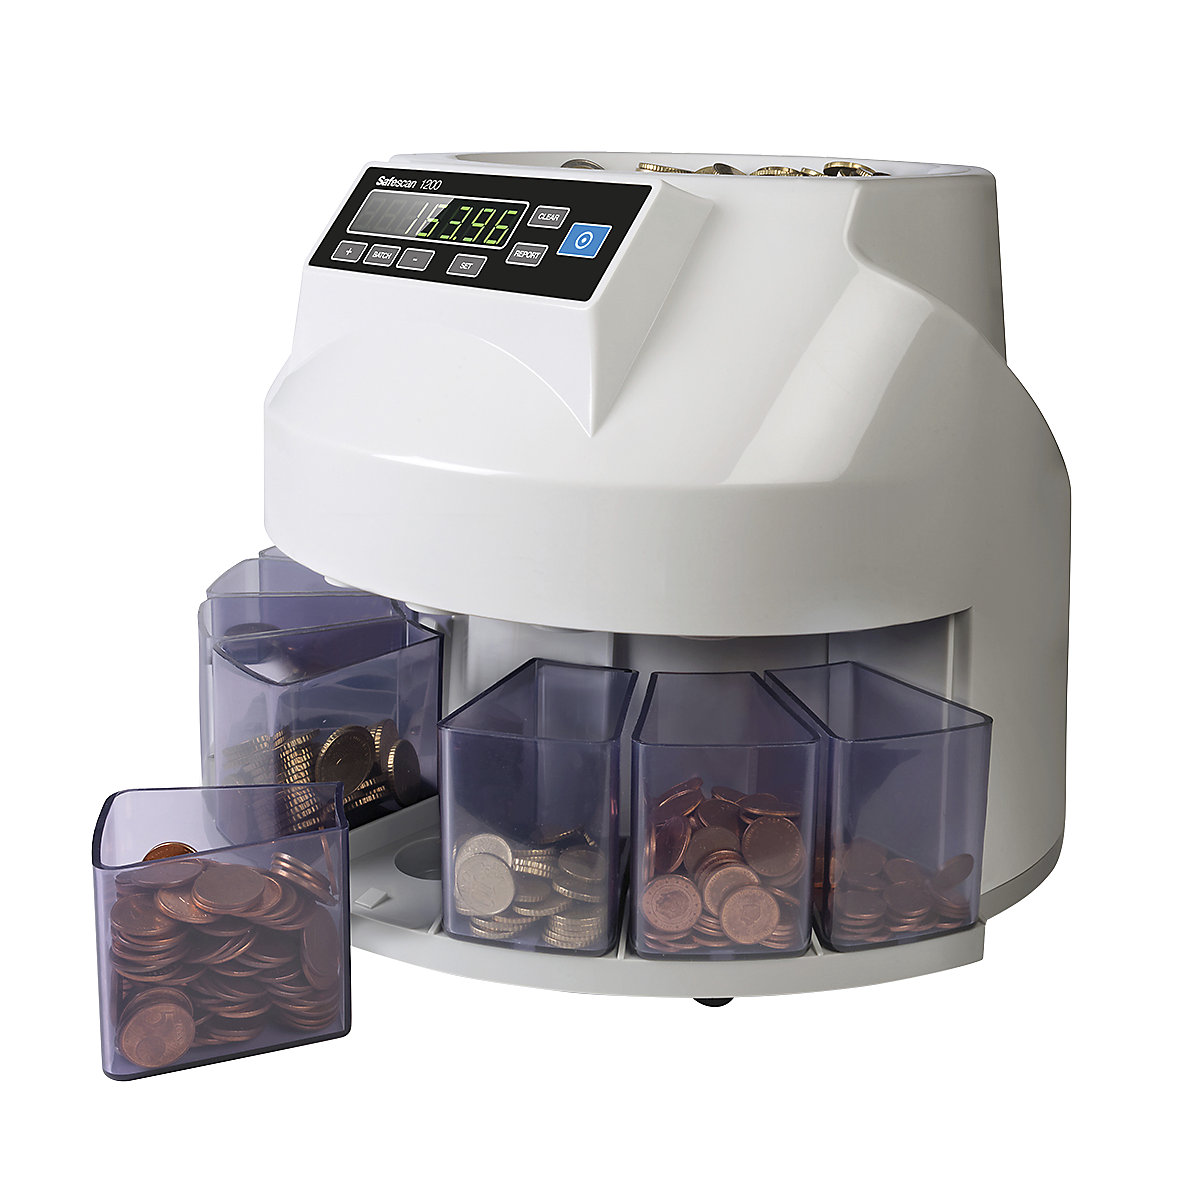 Coin counters and sorters – Safescan